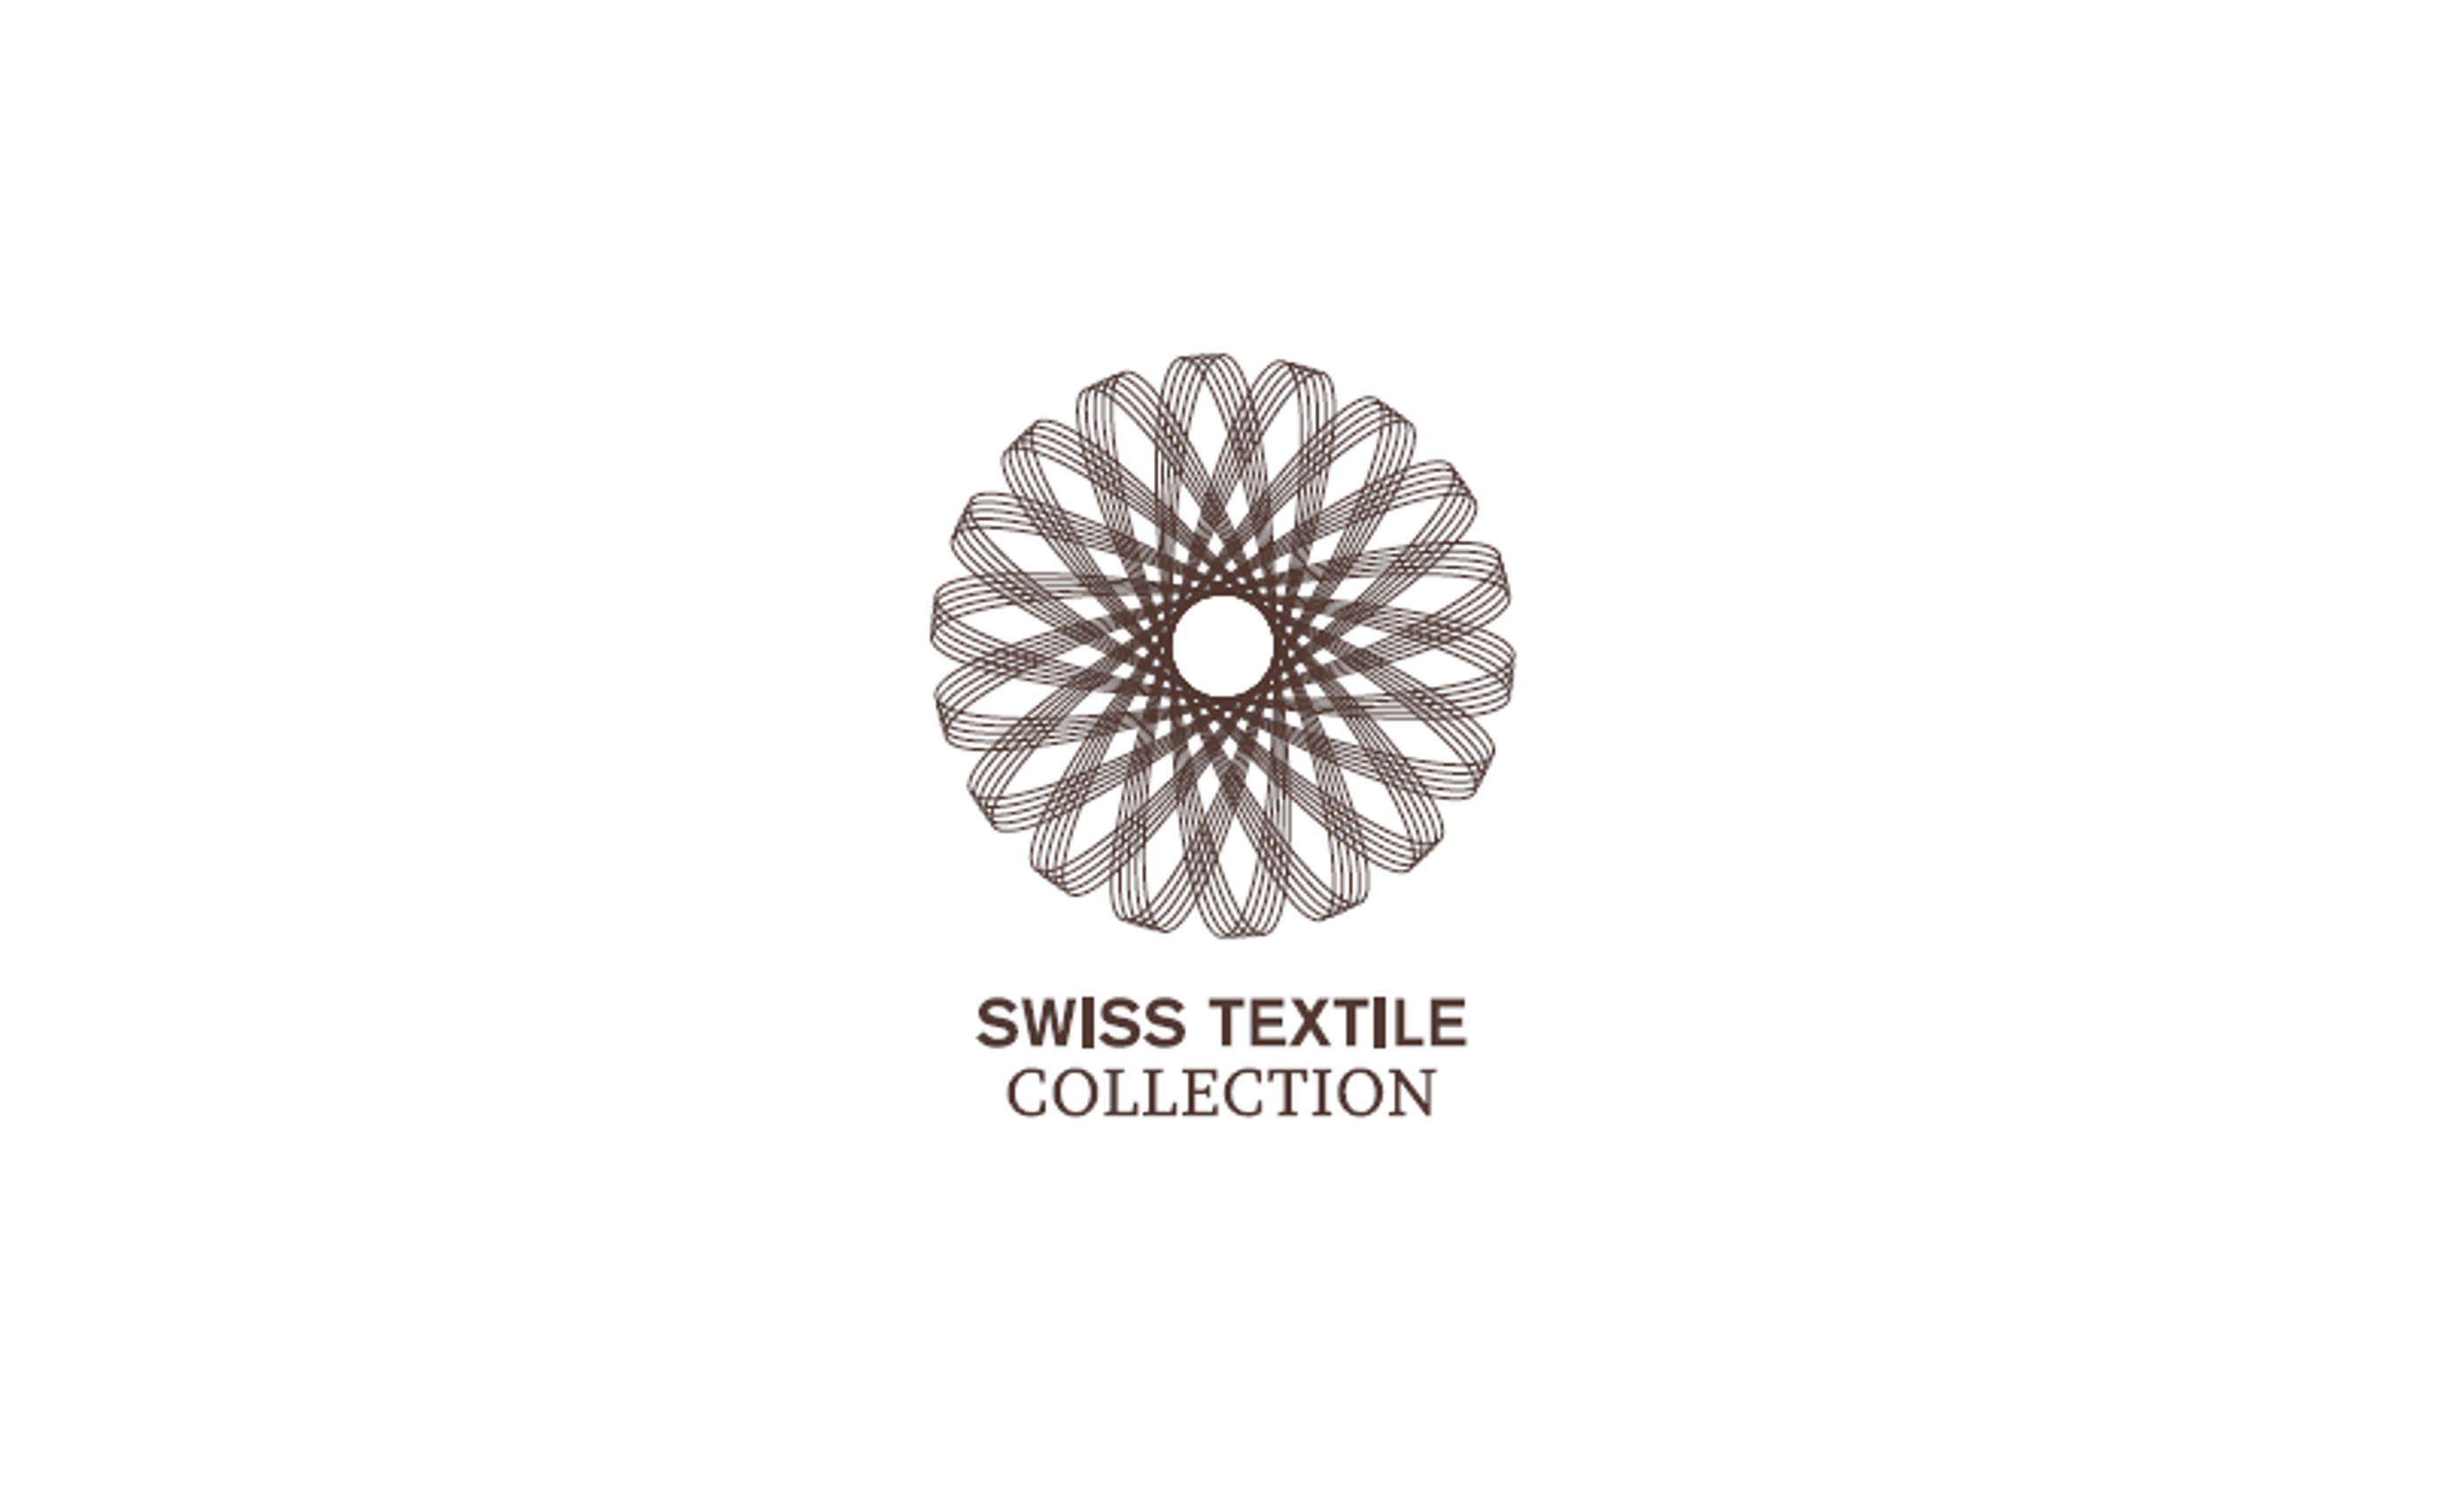 SWISS TEXTILE COLLECTION